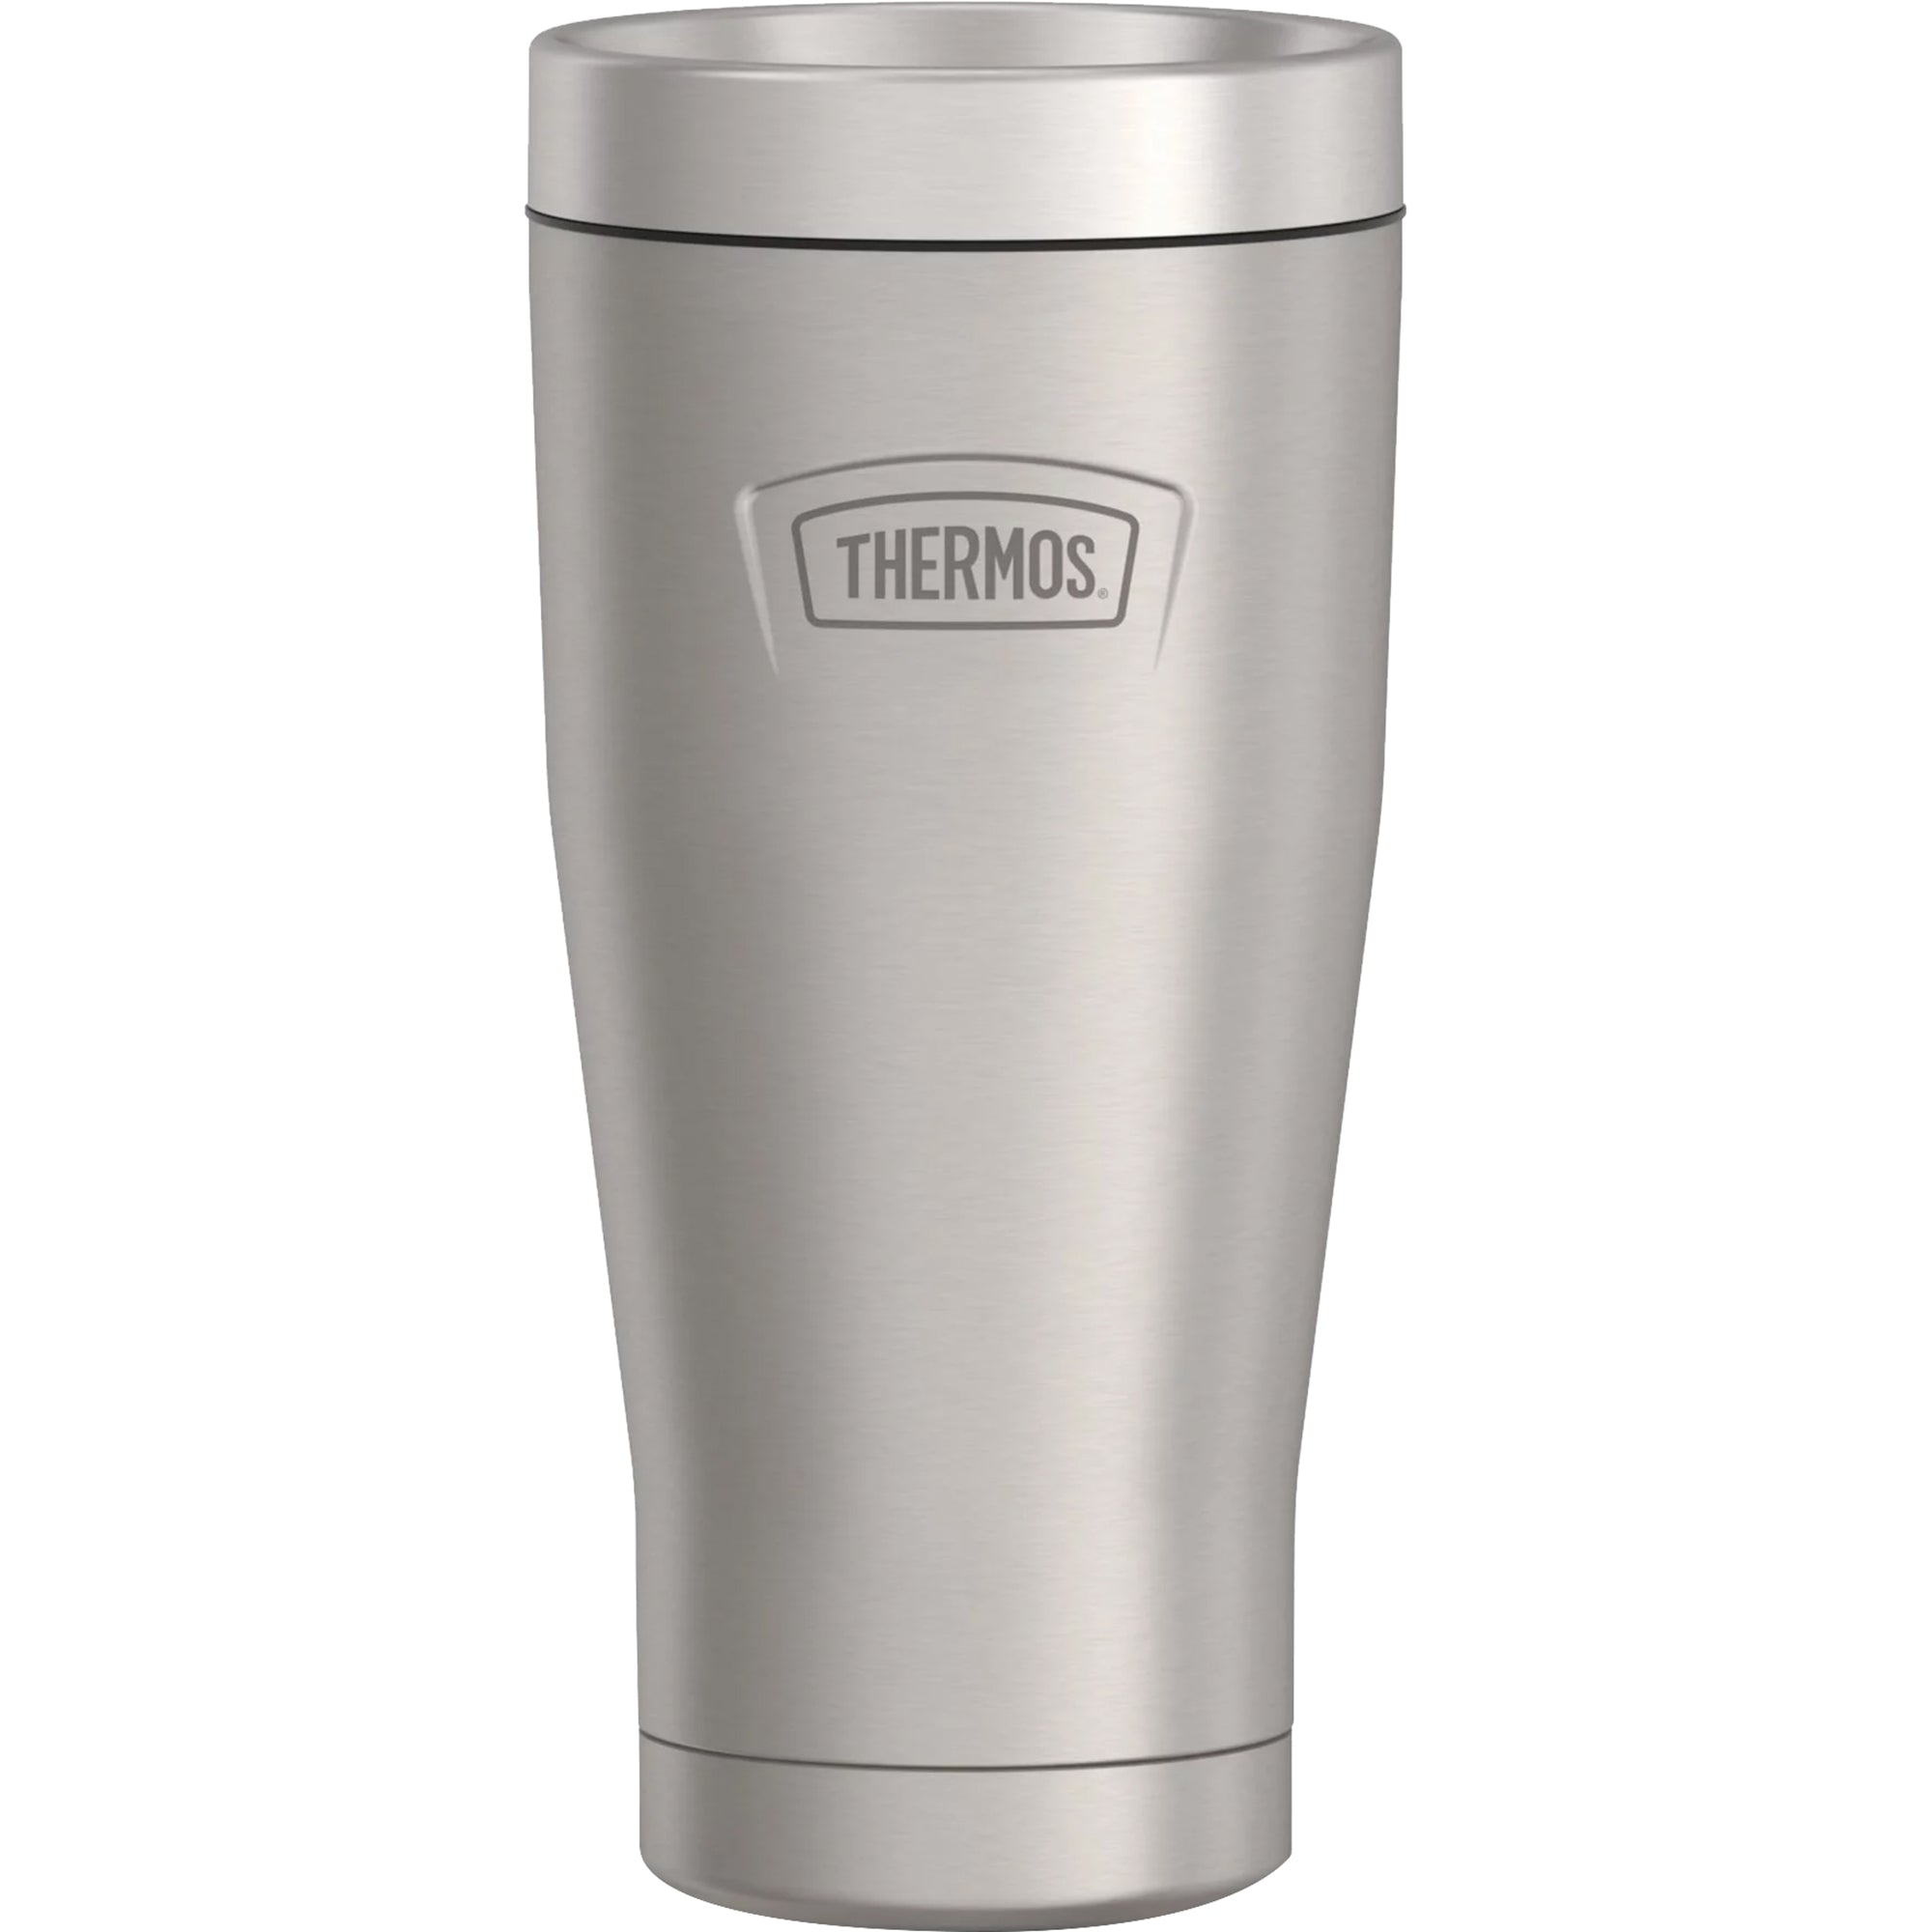 Thermos 16 oz. Icon Vacuum Insulated Stainless Steel Tumbler Thermos